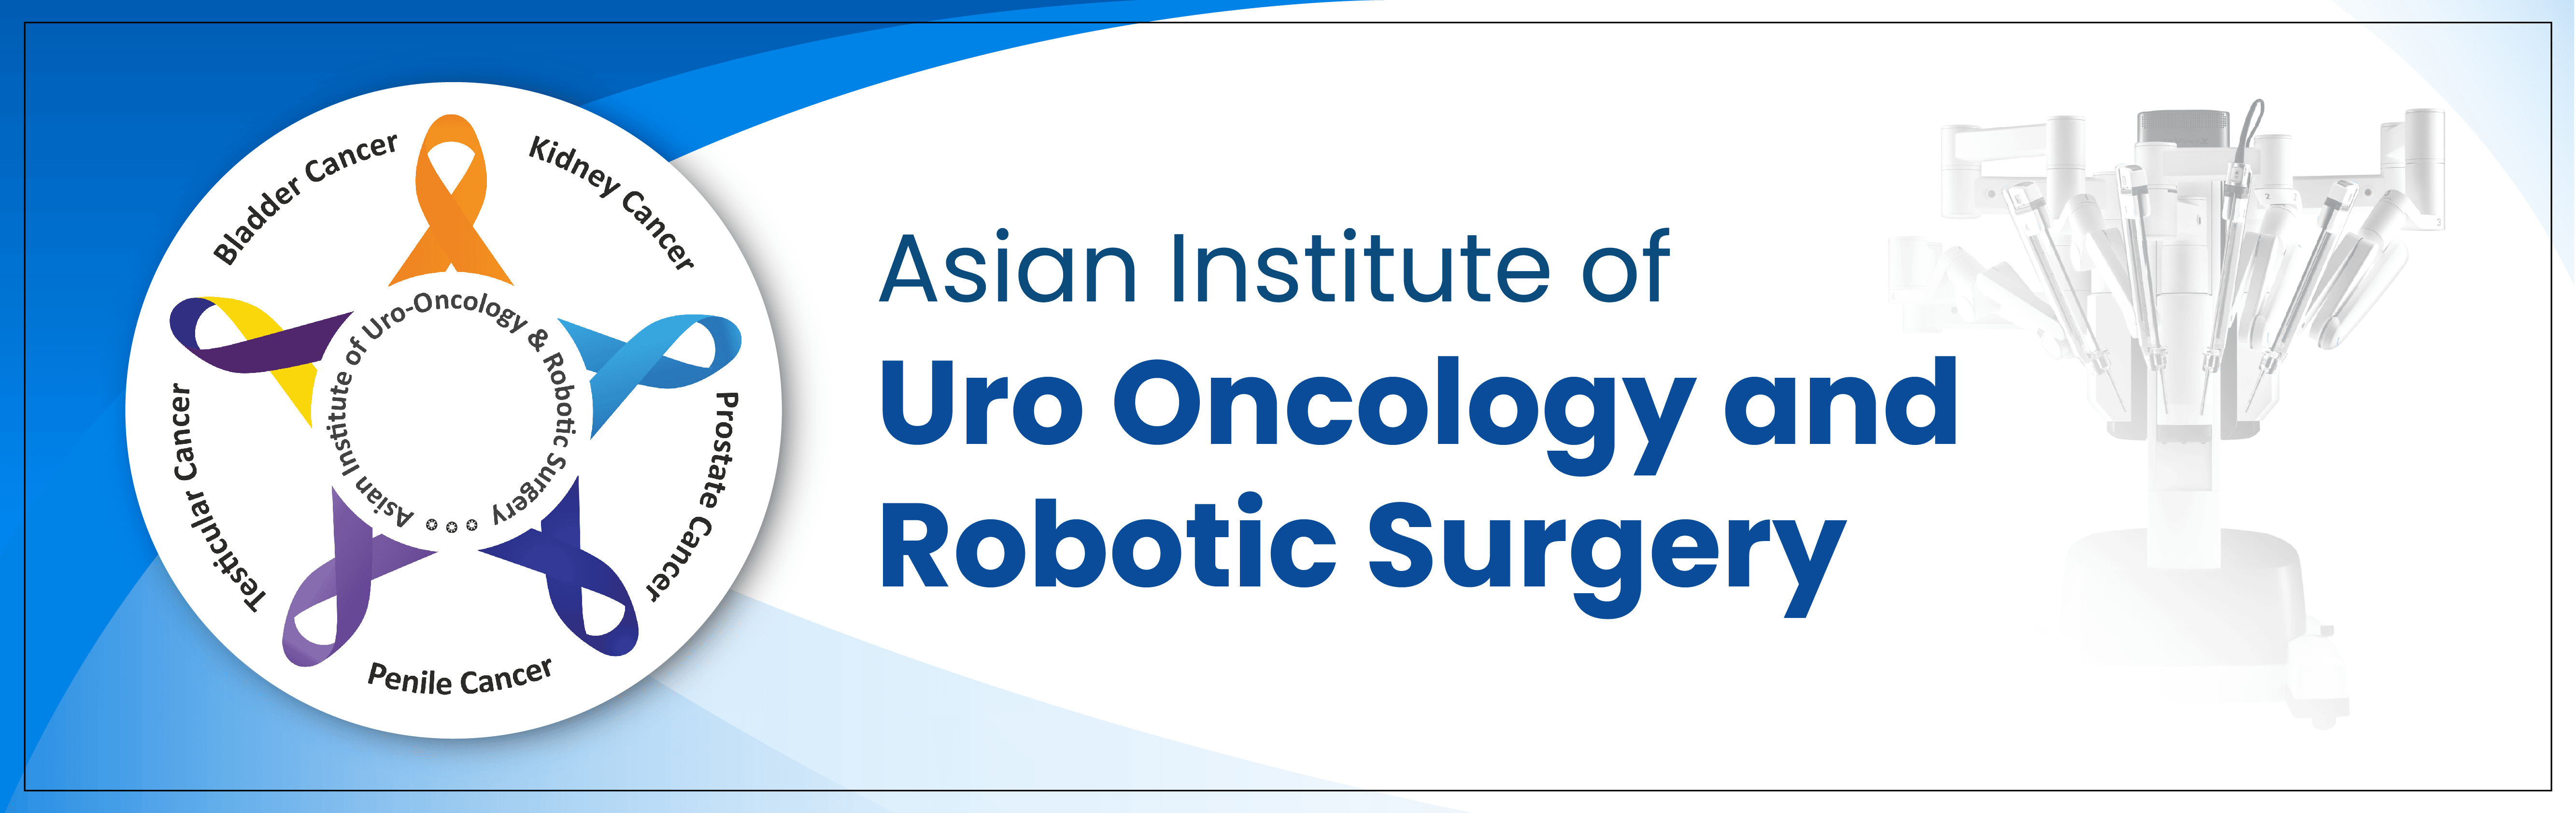 Asian institute of uro oncology and robotic surgery